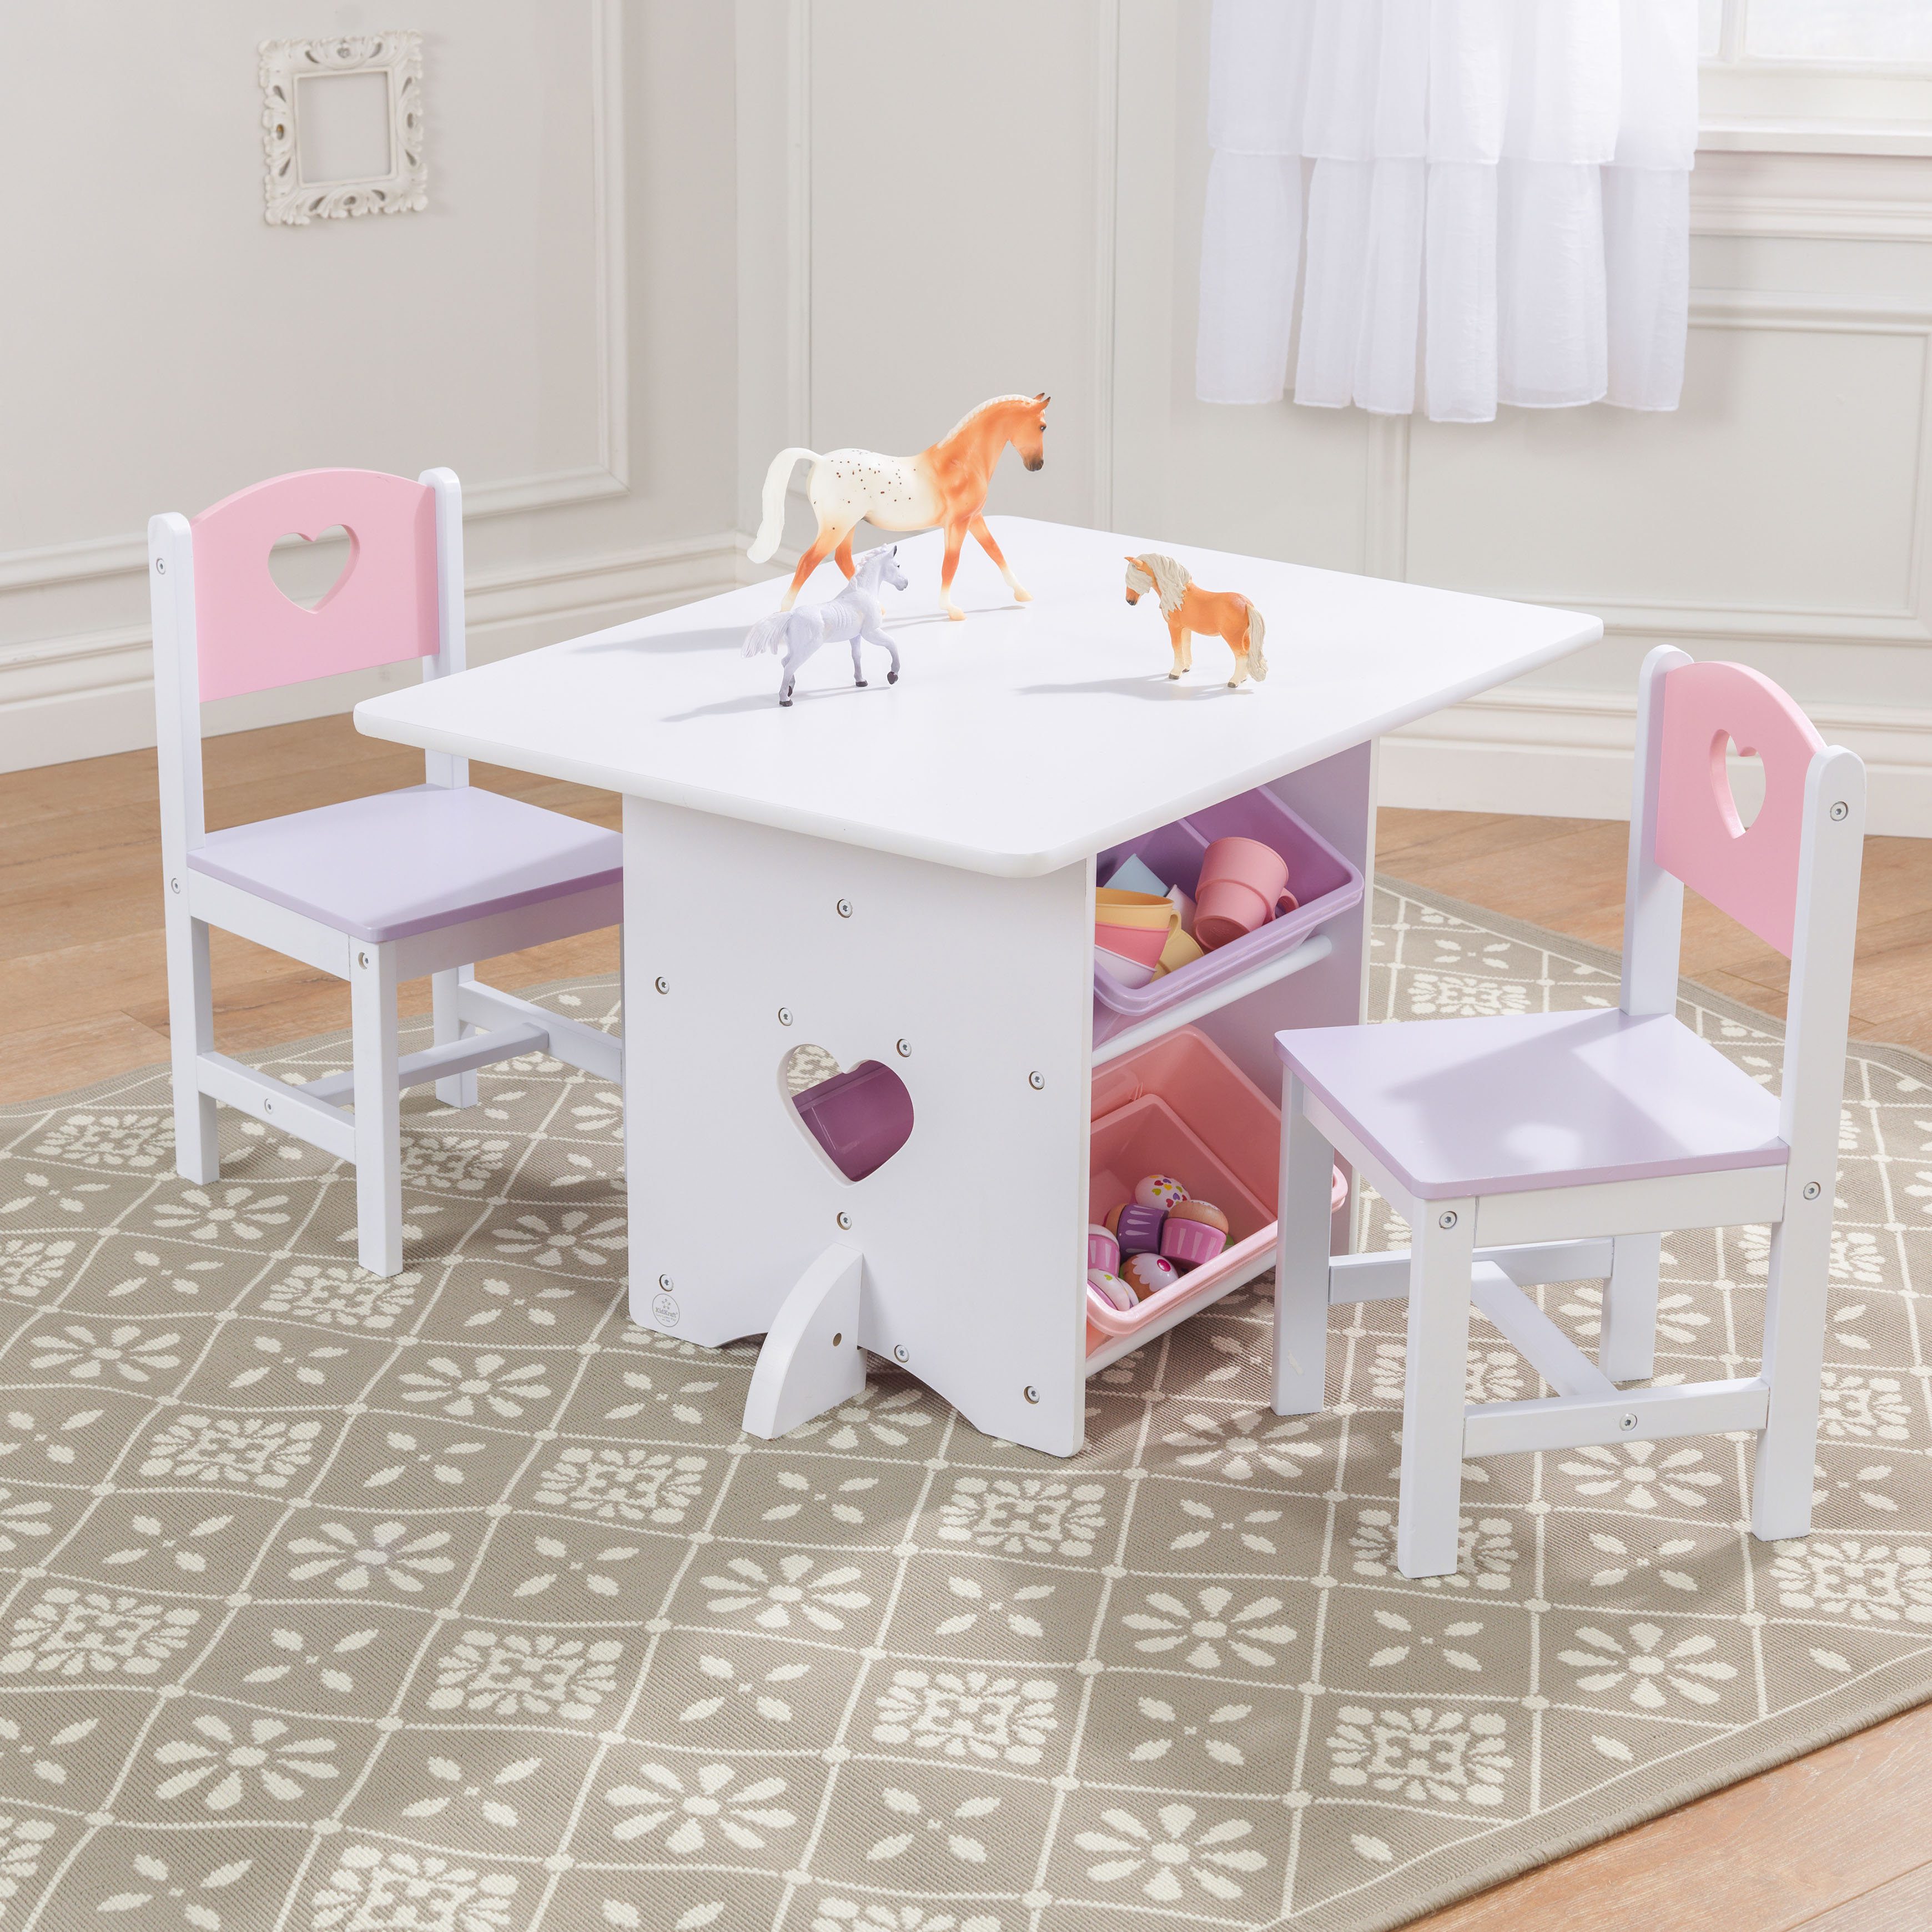 Best Table Set For Toddlers Express Shipping, 18 OFF   mugalzhar.kz